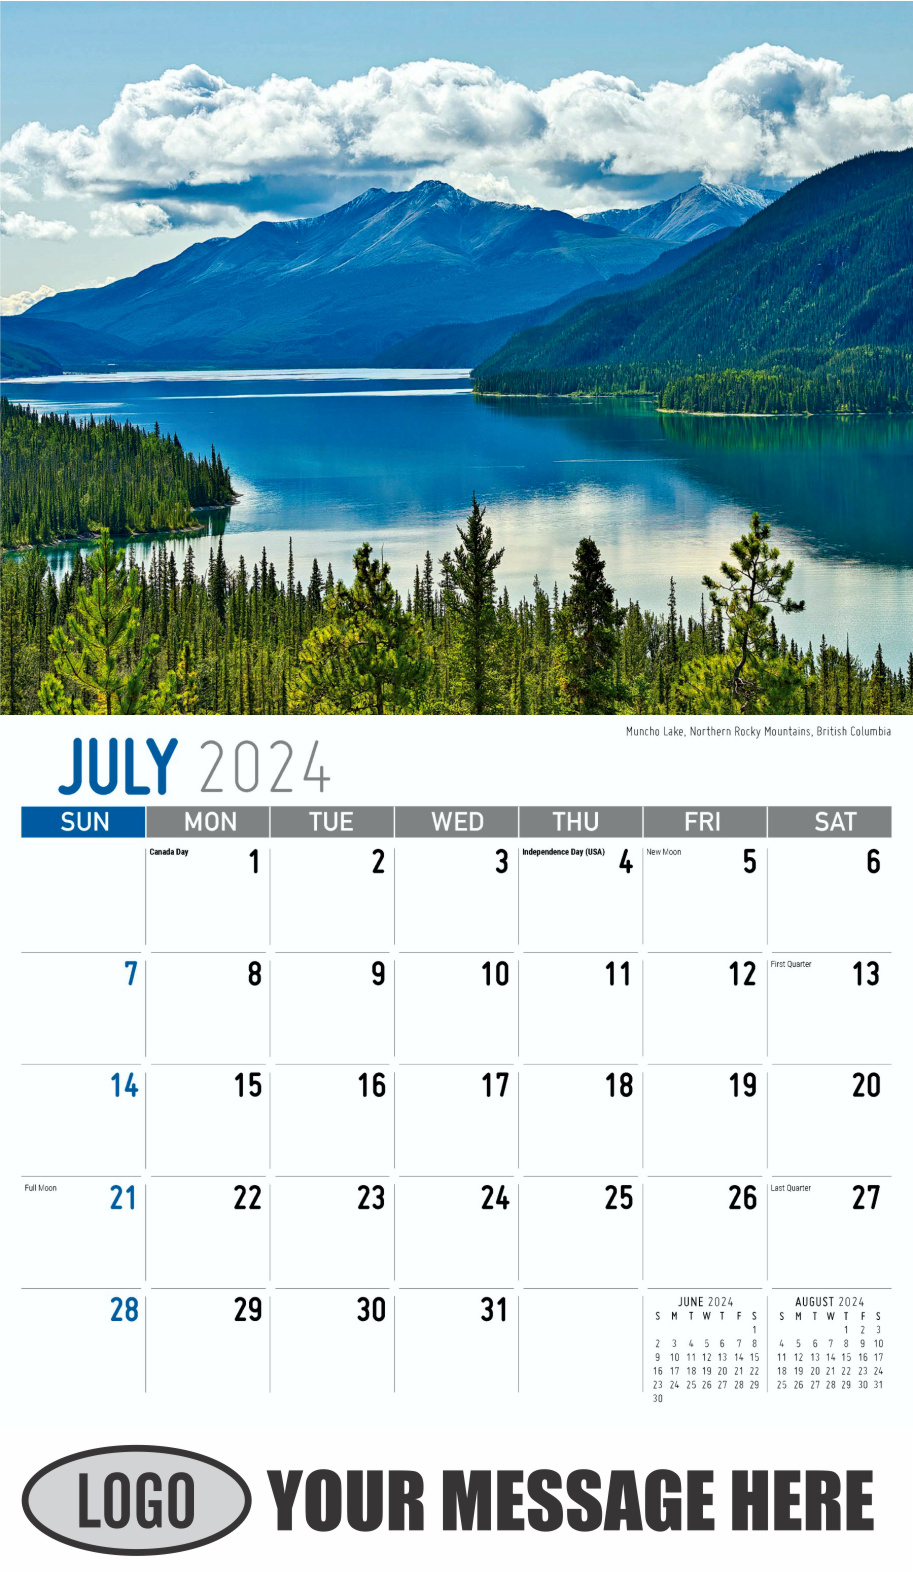 Scenes of Western Canada 2024 Business Promotional Wall Calendar - July